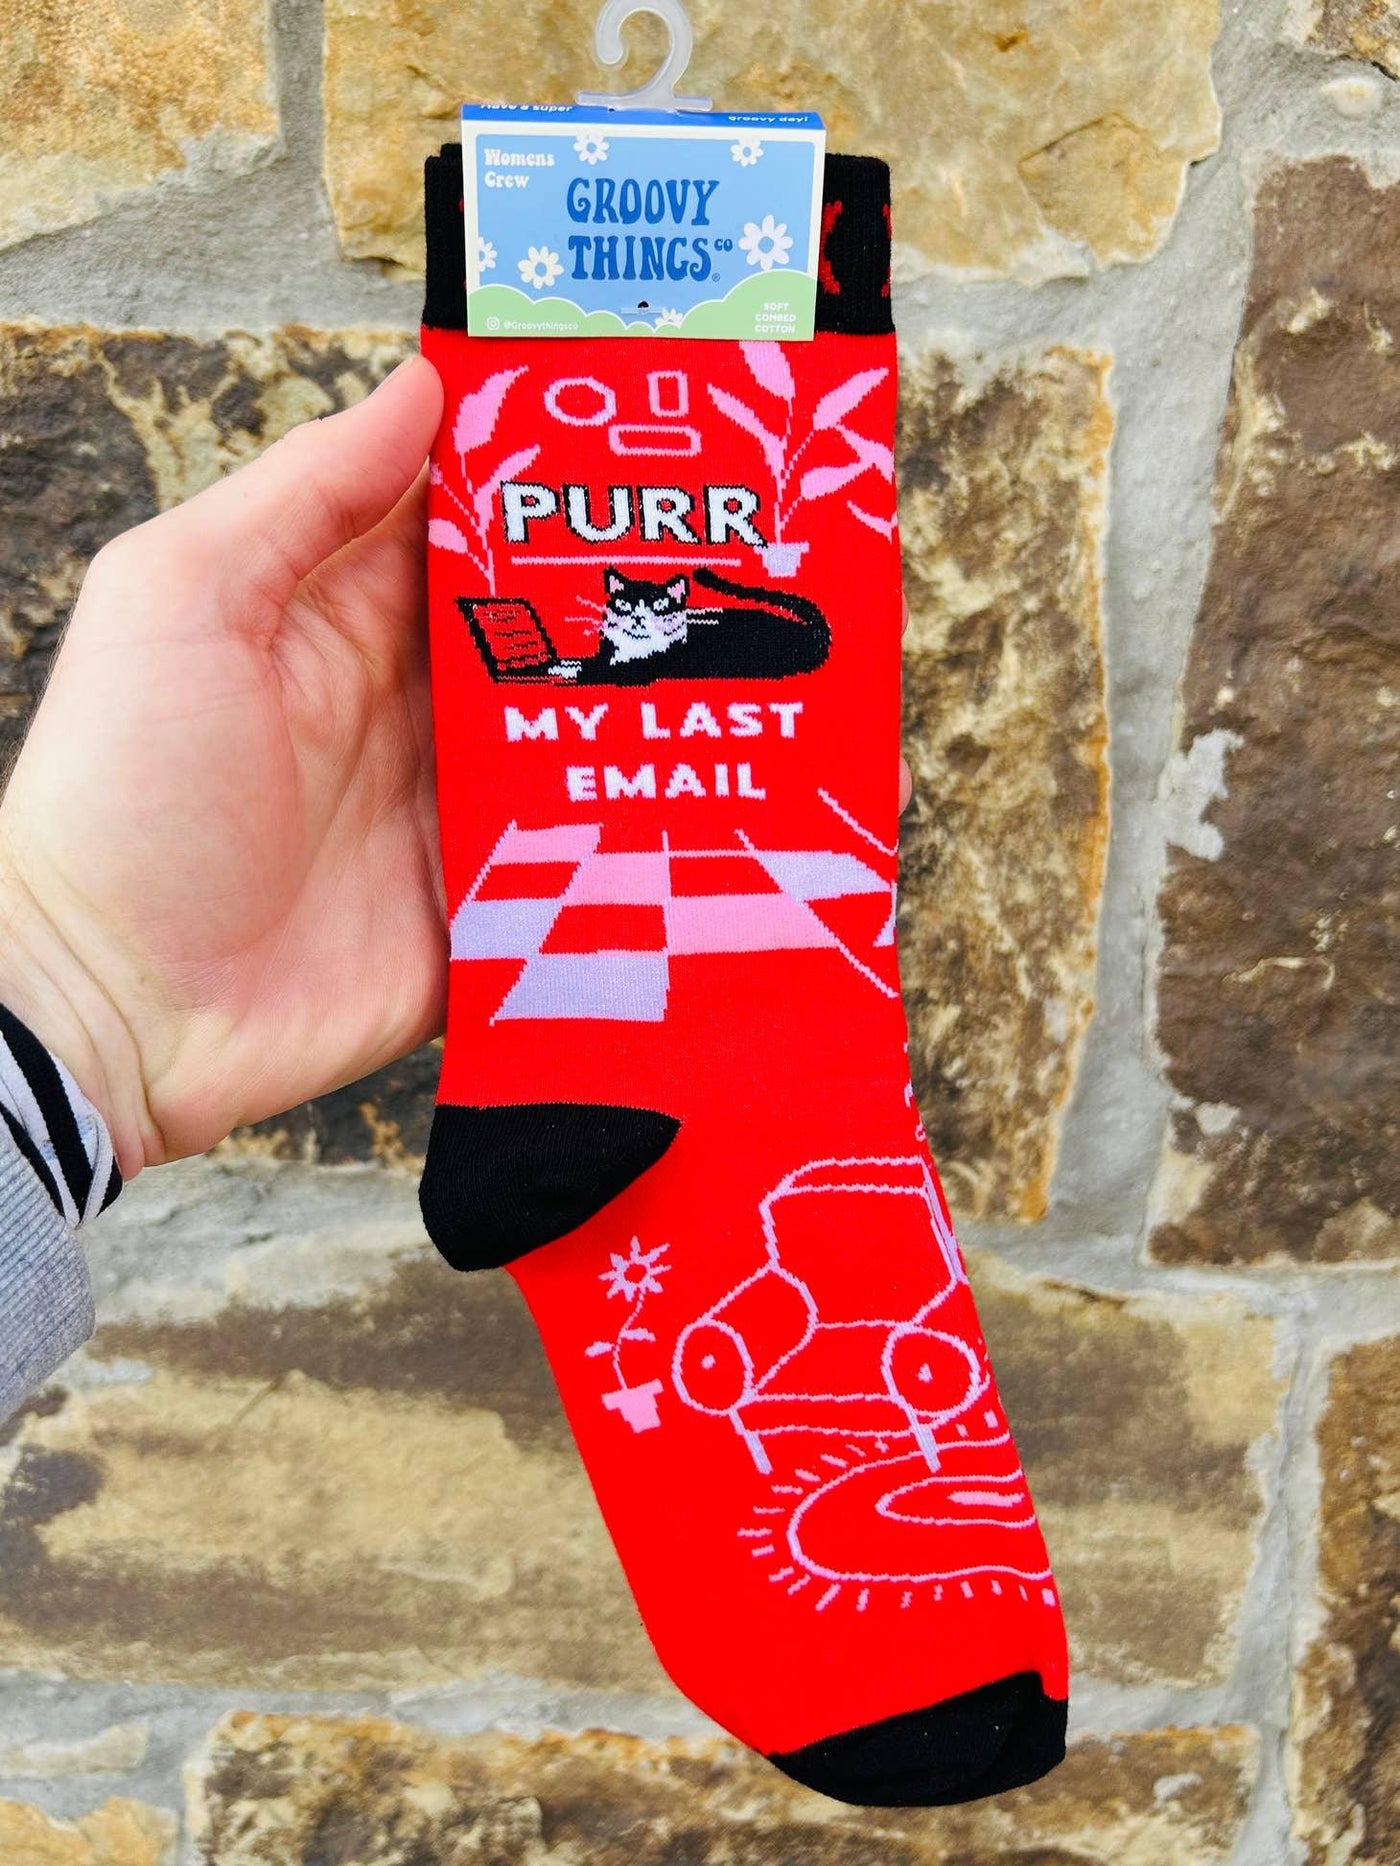 Purr My Last Email, Womens Crew - Groovy Things - The Sock Monster